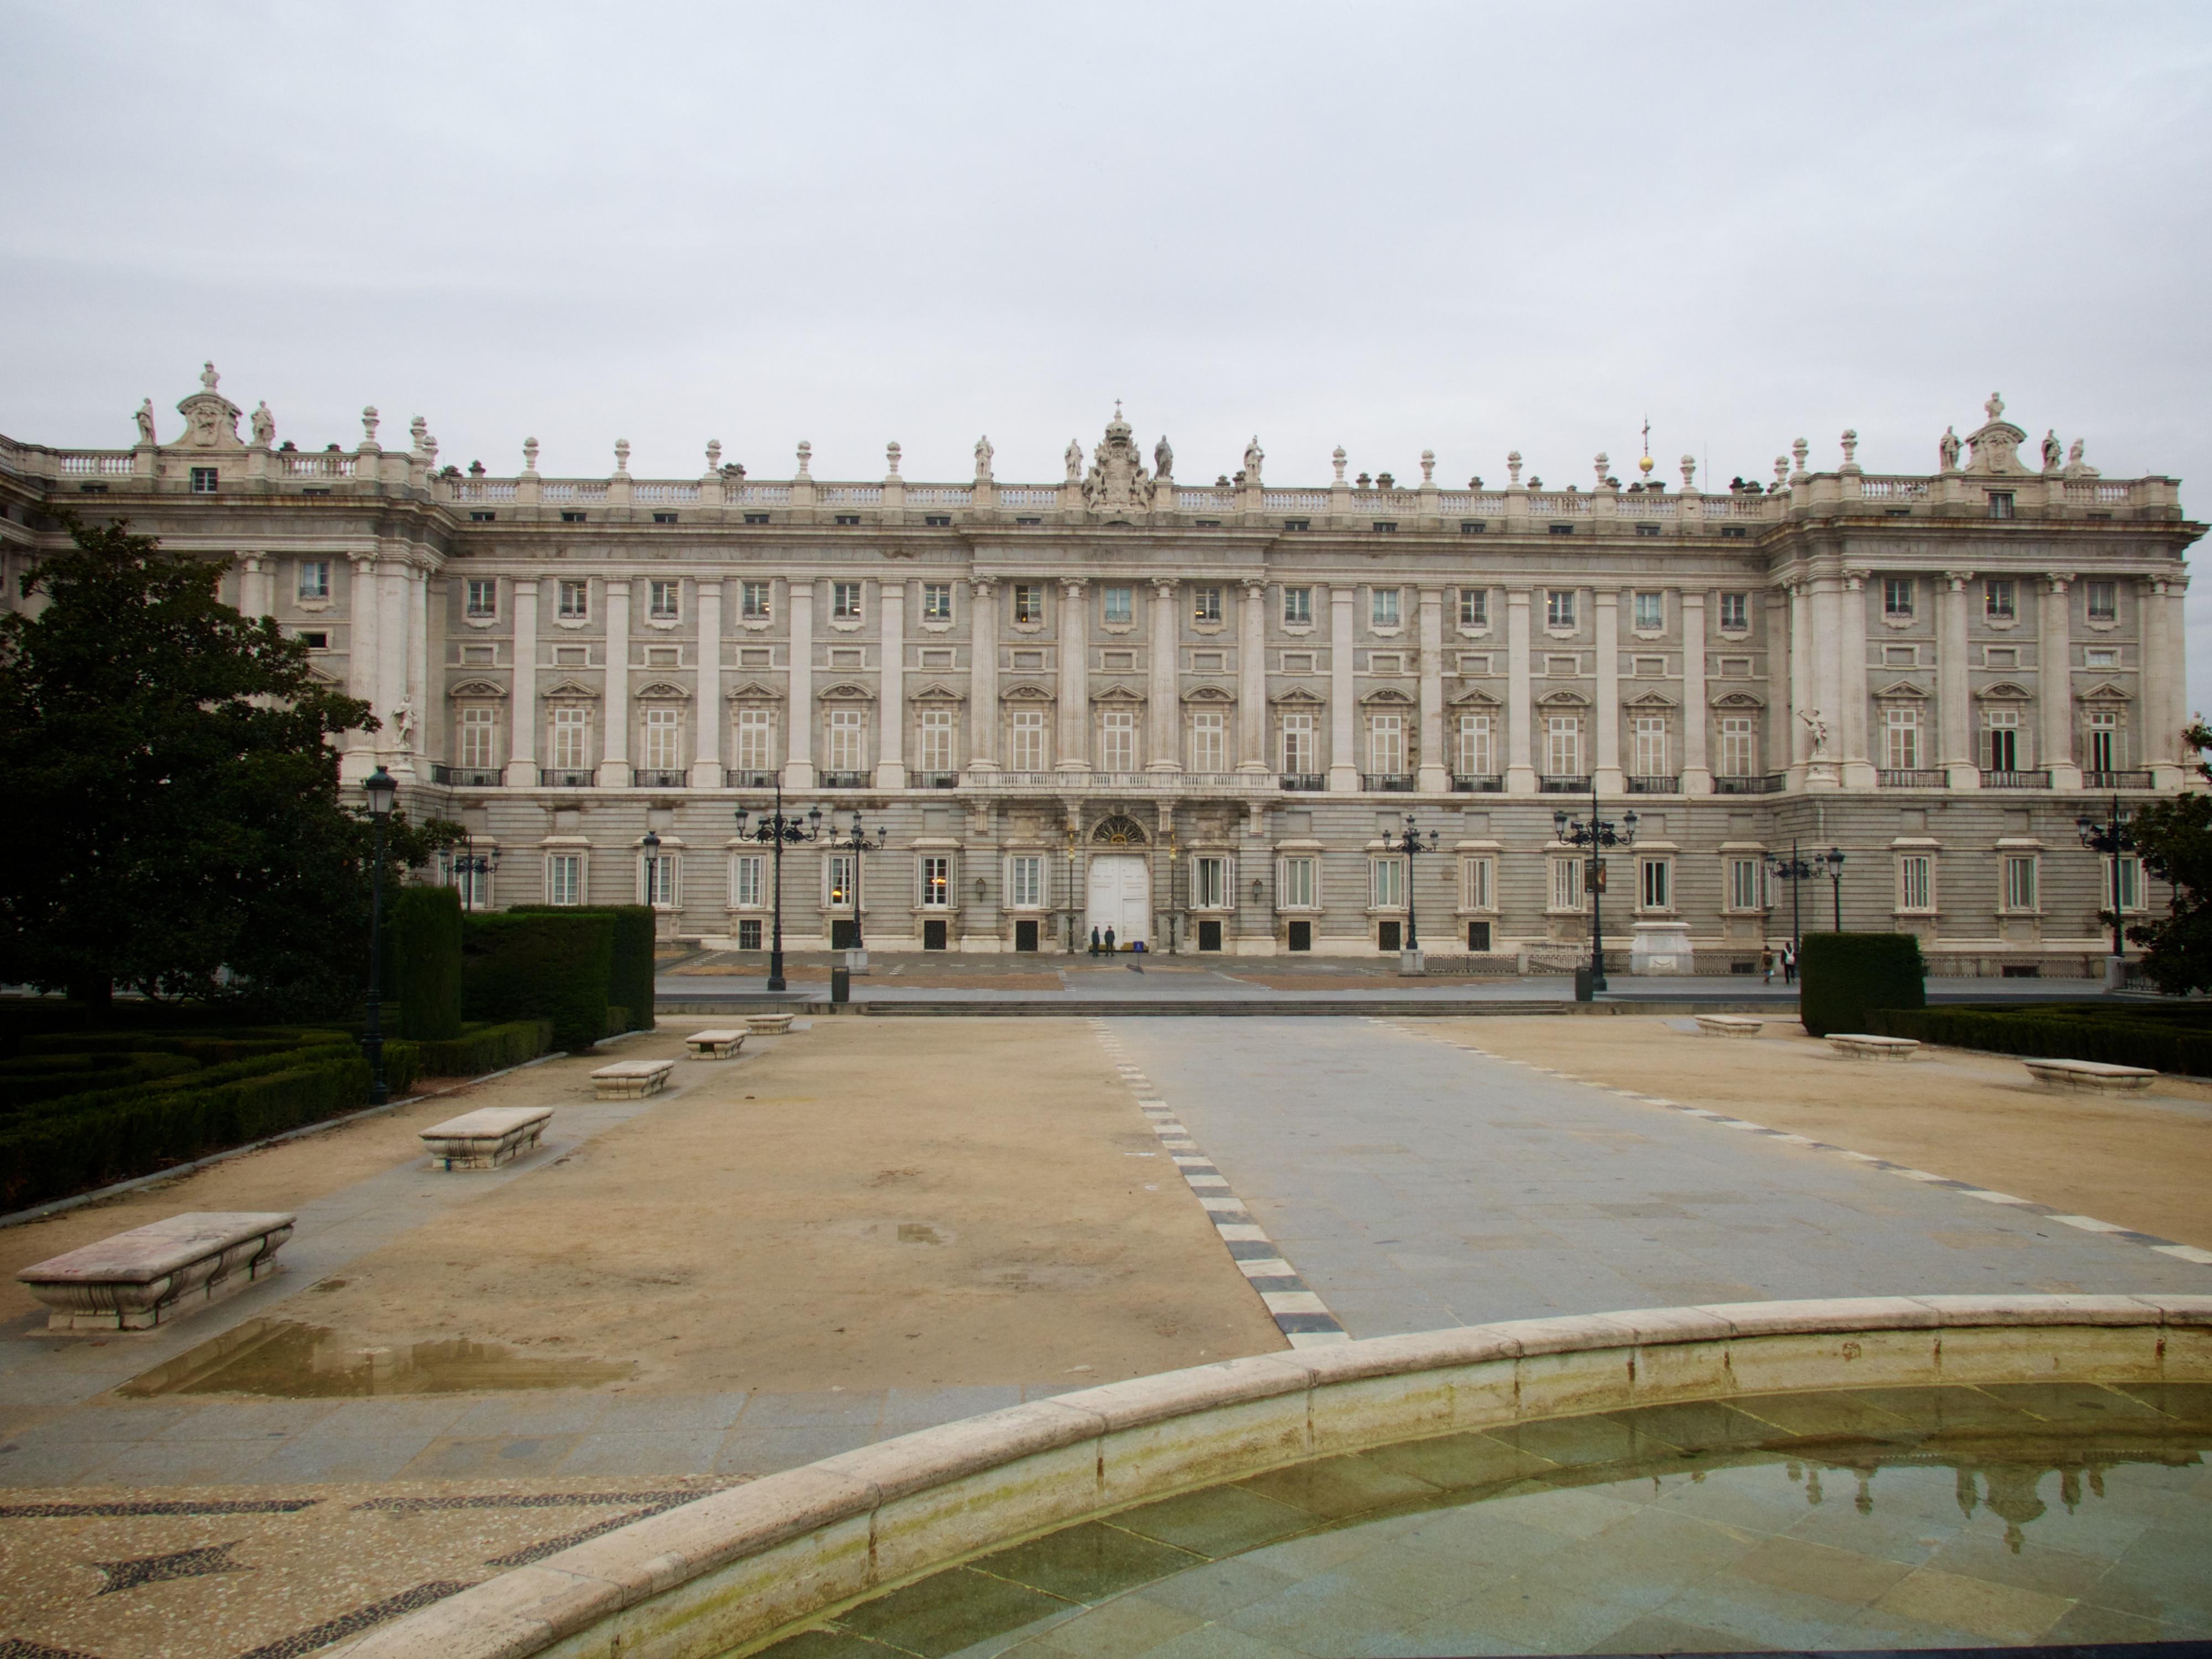 Royal Palace of Madrid from Plaza de Oriente